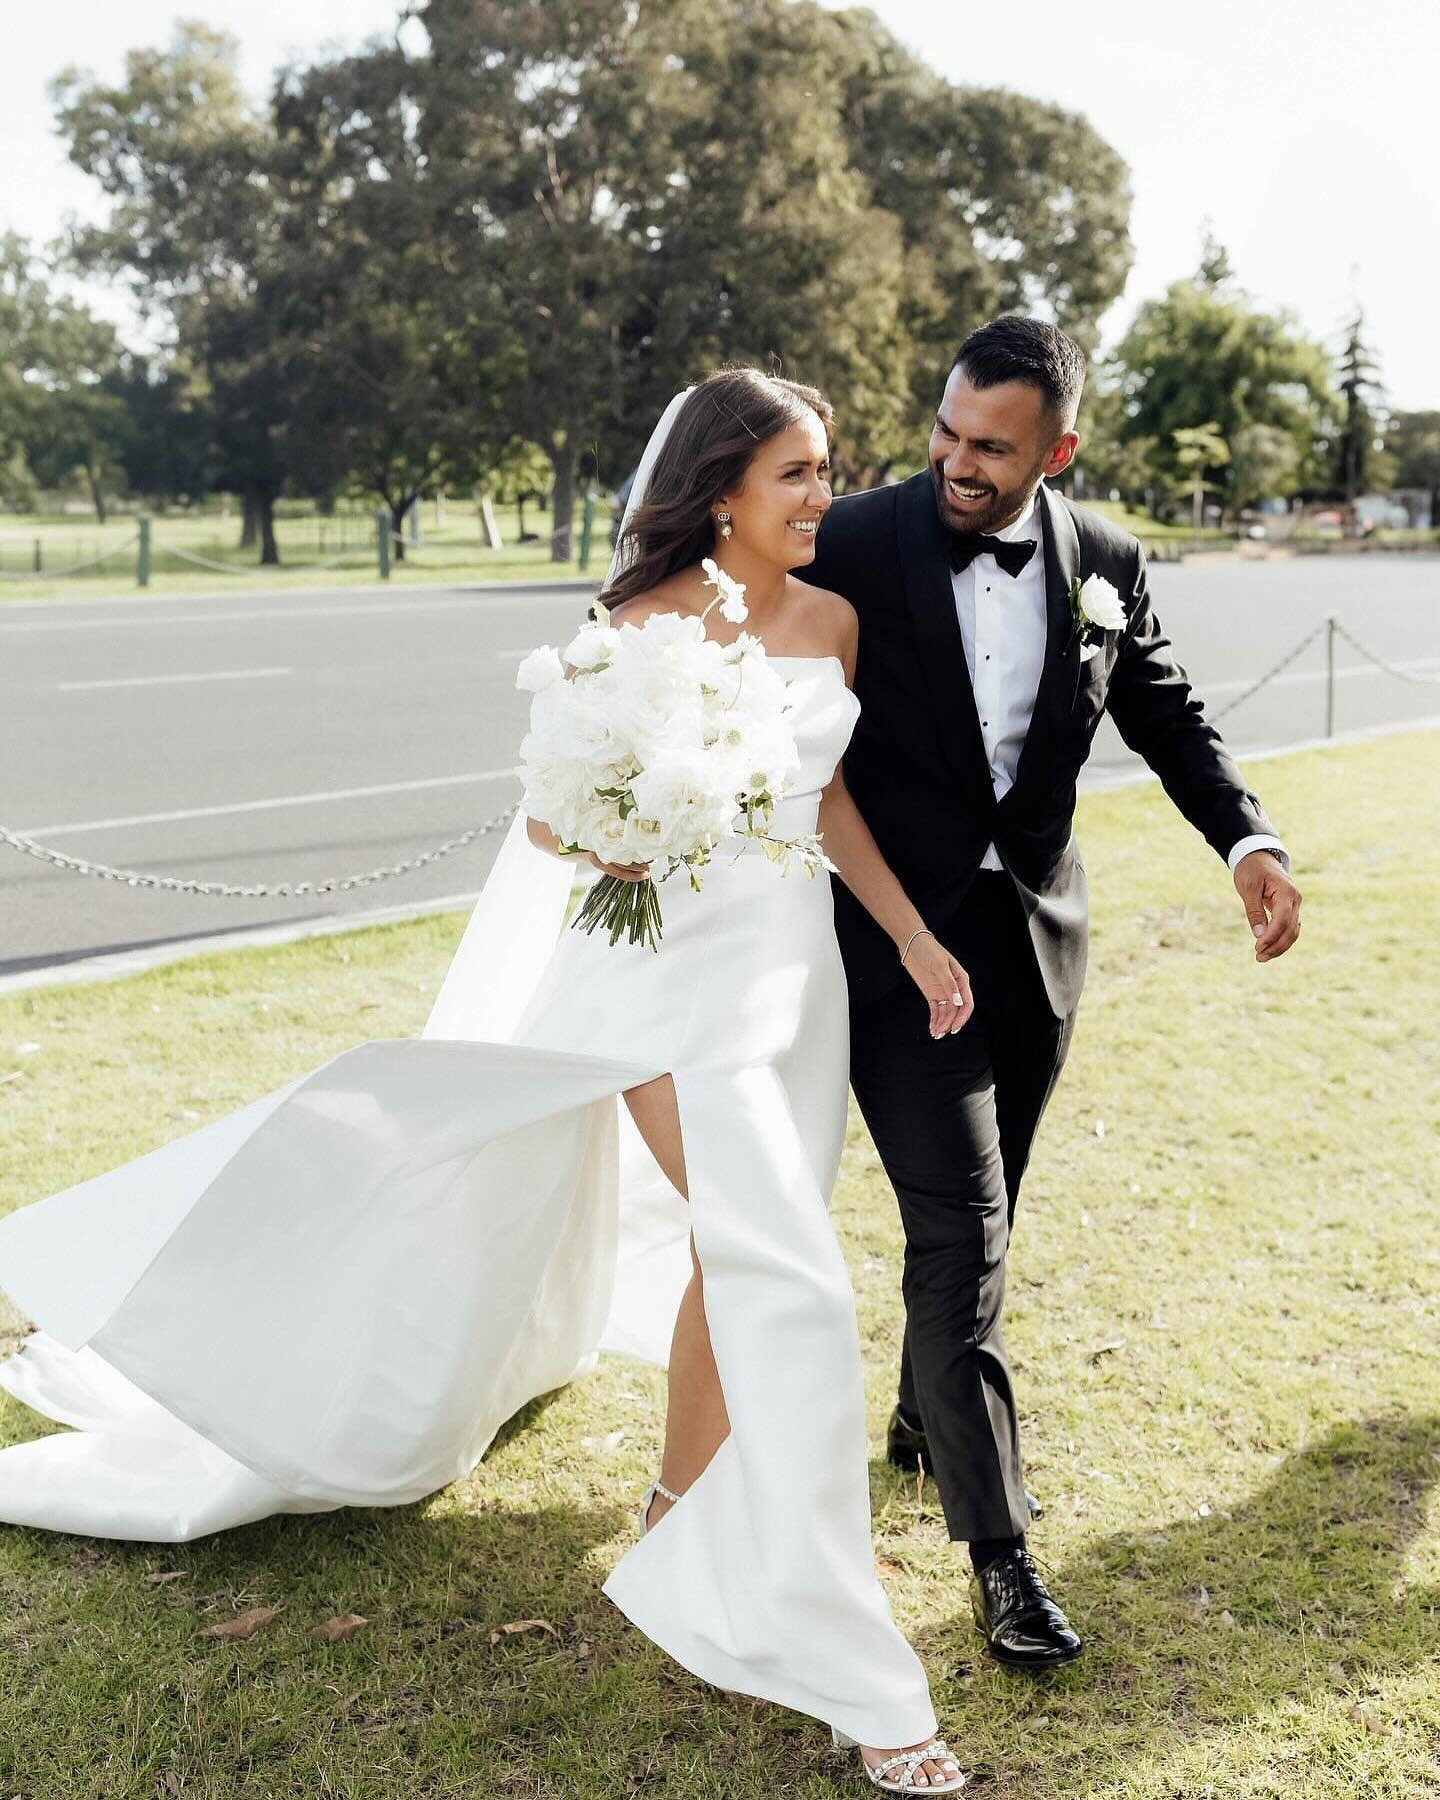 High school sweet hearts Ellie &amp; Diogo married last weekend at Greenfields in Albert Park. It was relaxed, personal and short &amp; sweet, just as they wanted. 
Celebrant: @marrymetee 
Photographer: @fernandstonephotography_ 
Videographer: @filmm